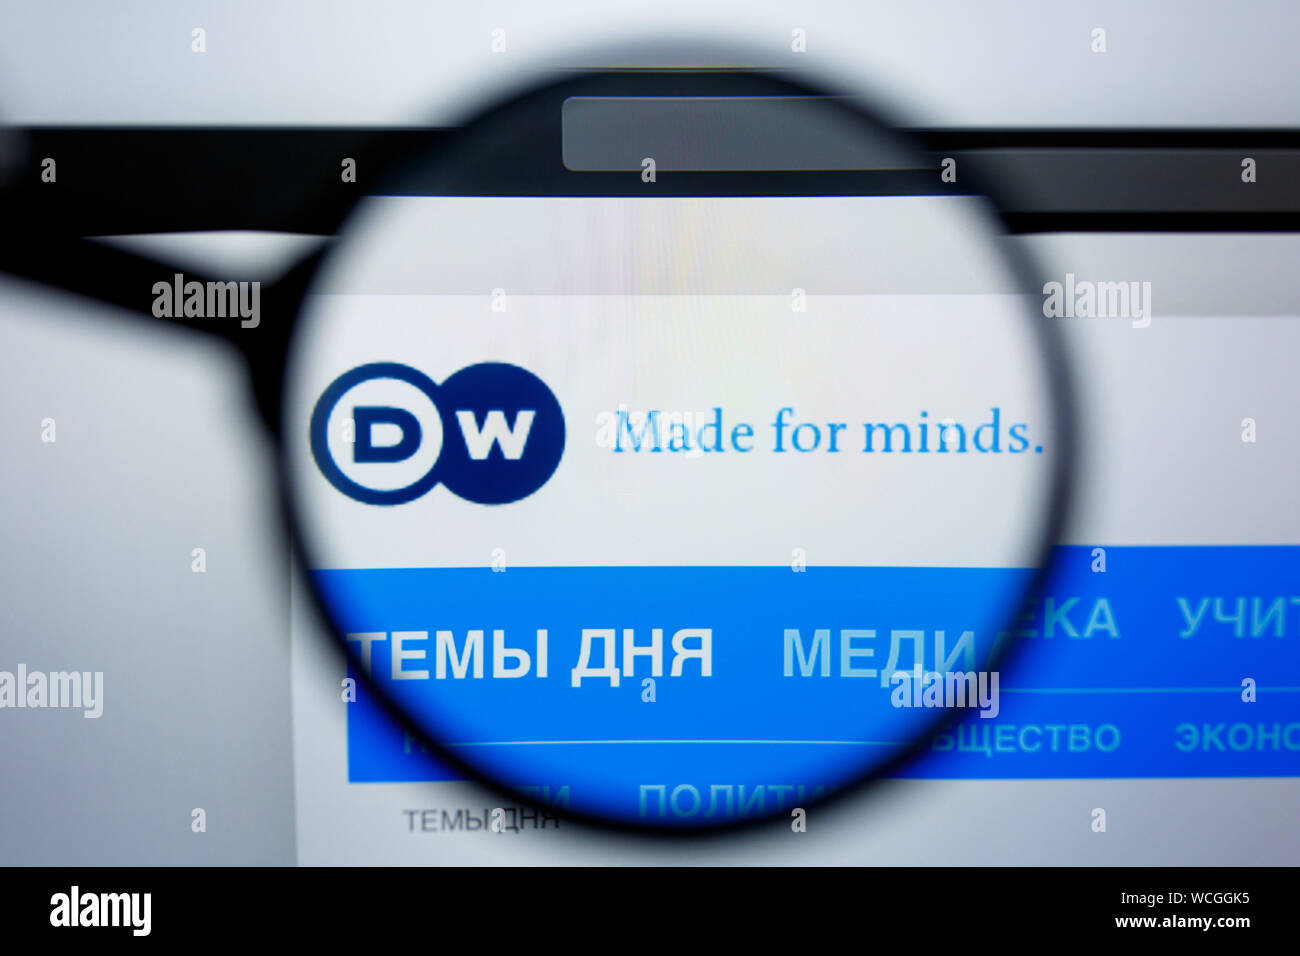 Los Angeles, California, USA - 29 Jule 2019: Illustrative Editorial of DW.COM website homepage. DW logo visible on display screen. Stock Photo